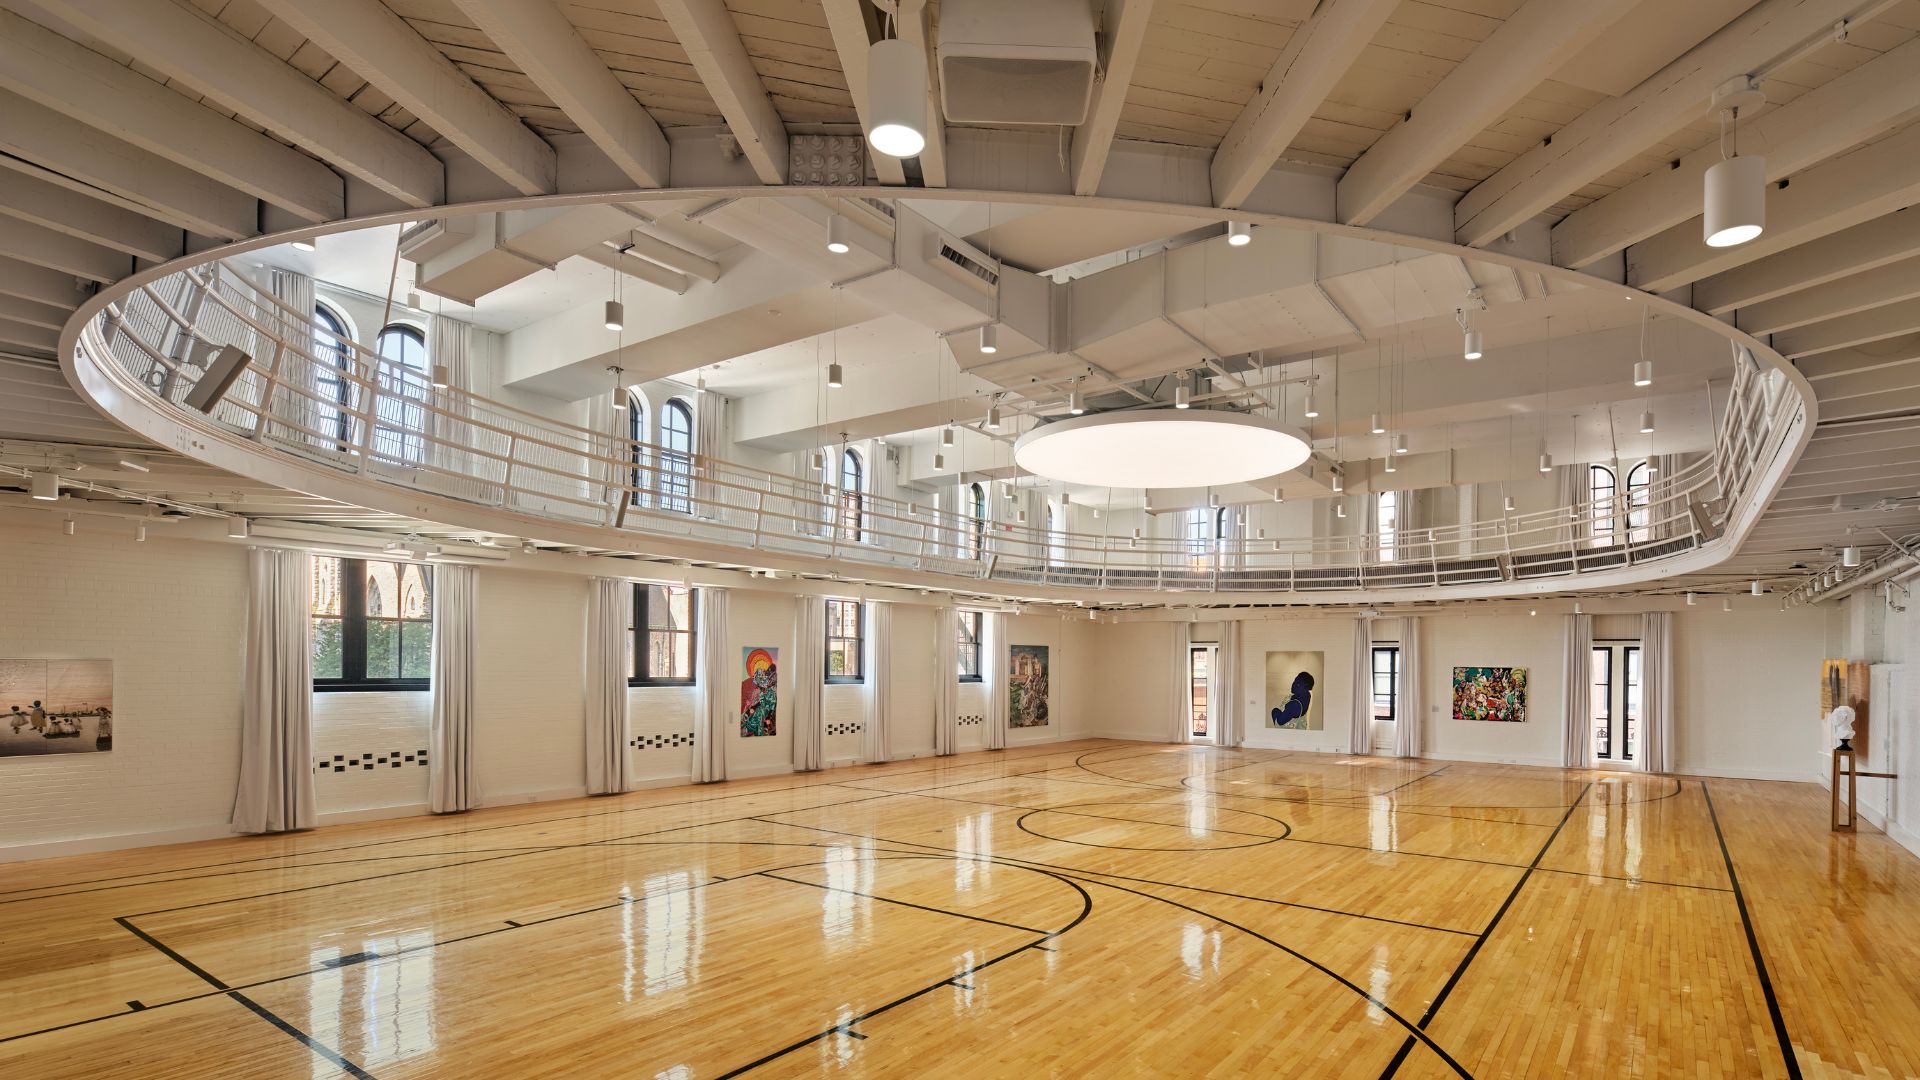 The gym-turned-gallery at 21c Museum Hotel St. Louis features artwork by artists from around the world.